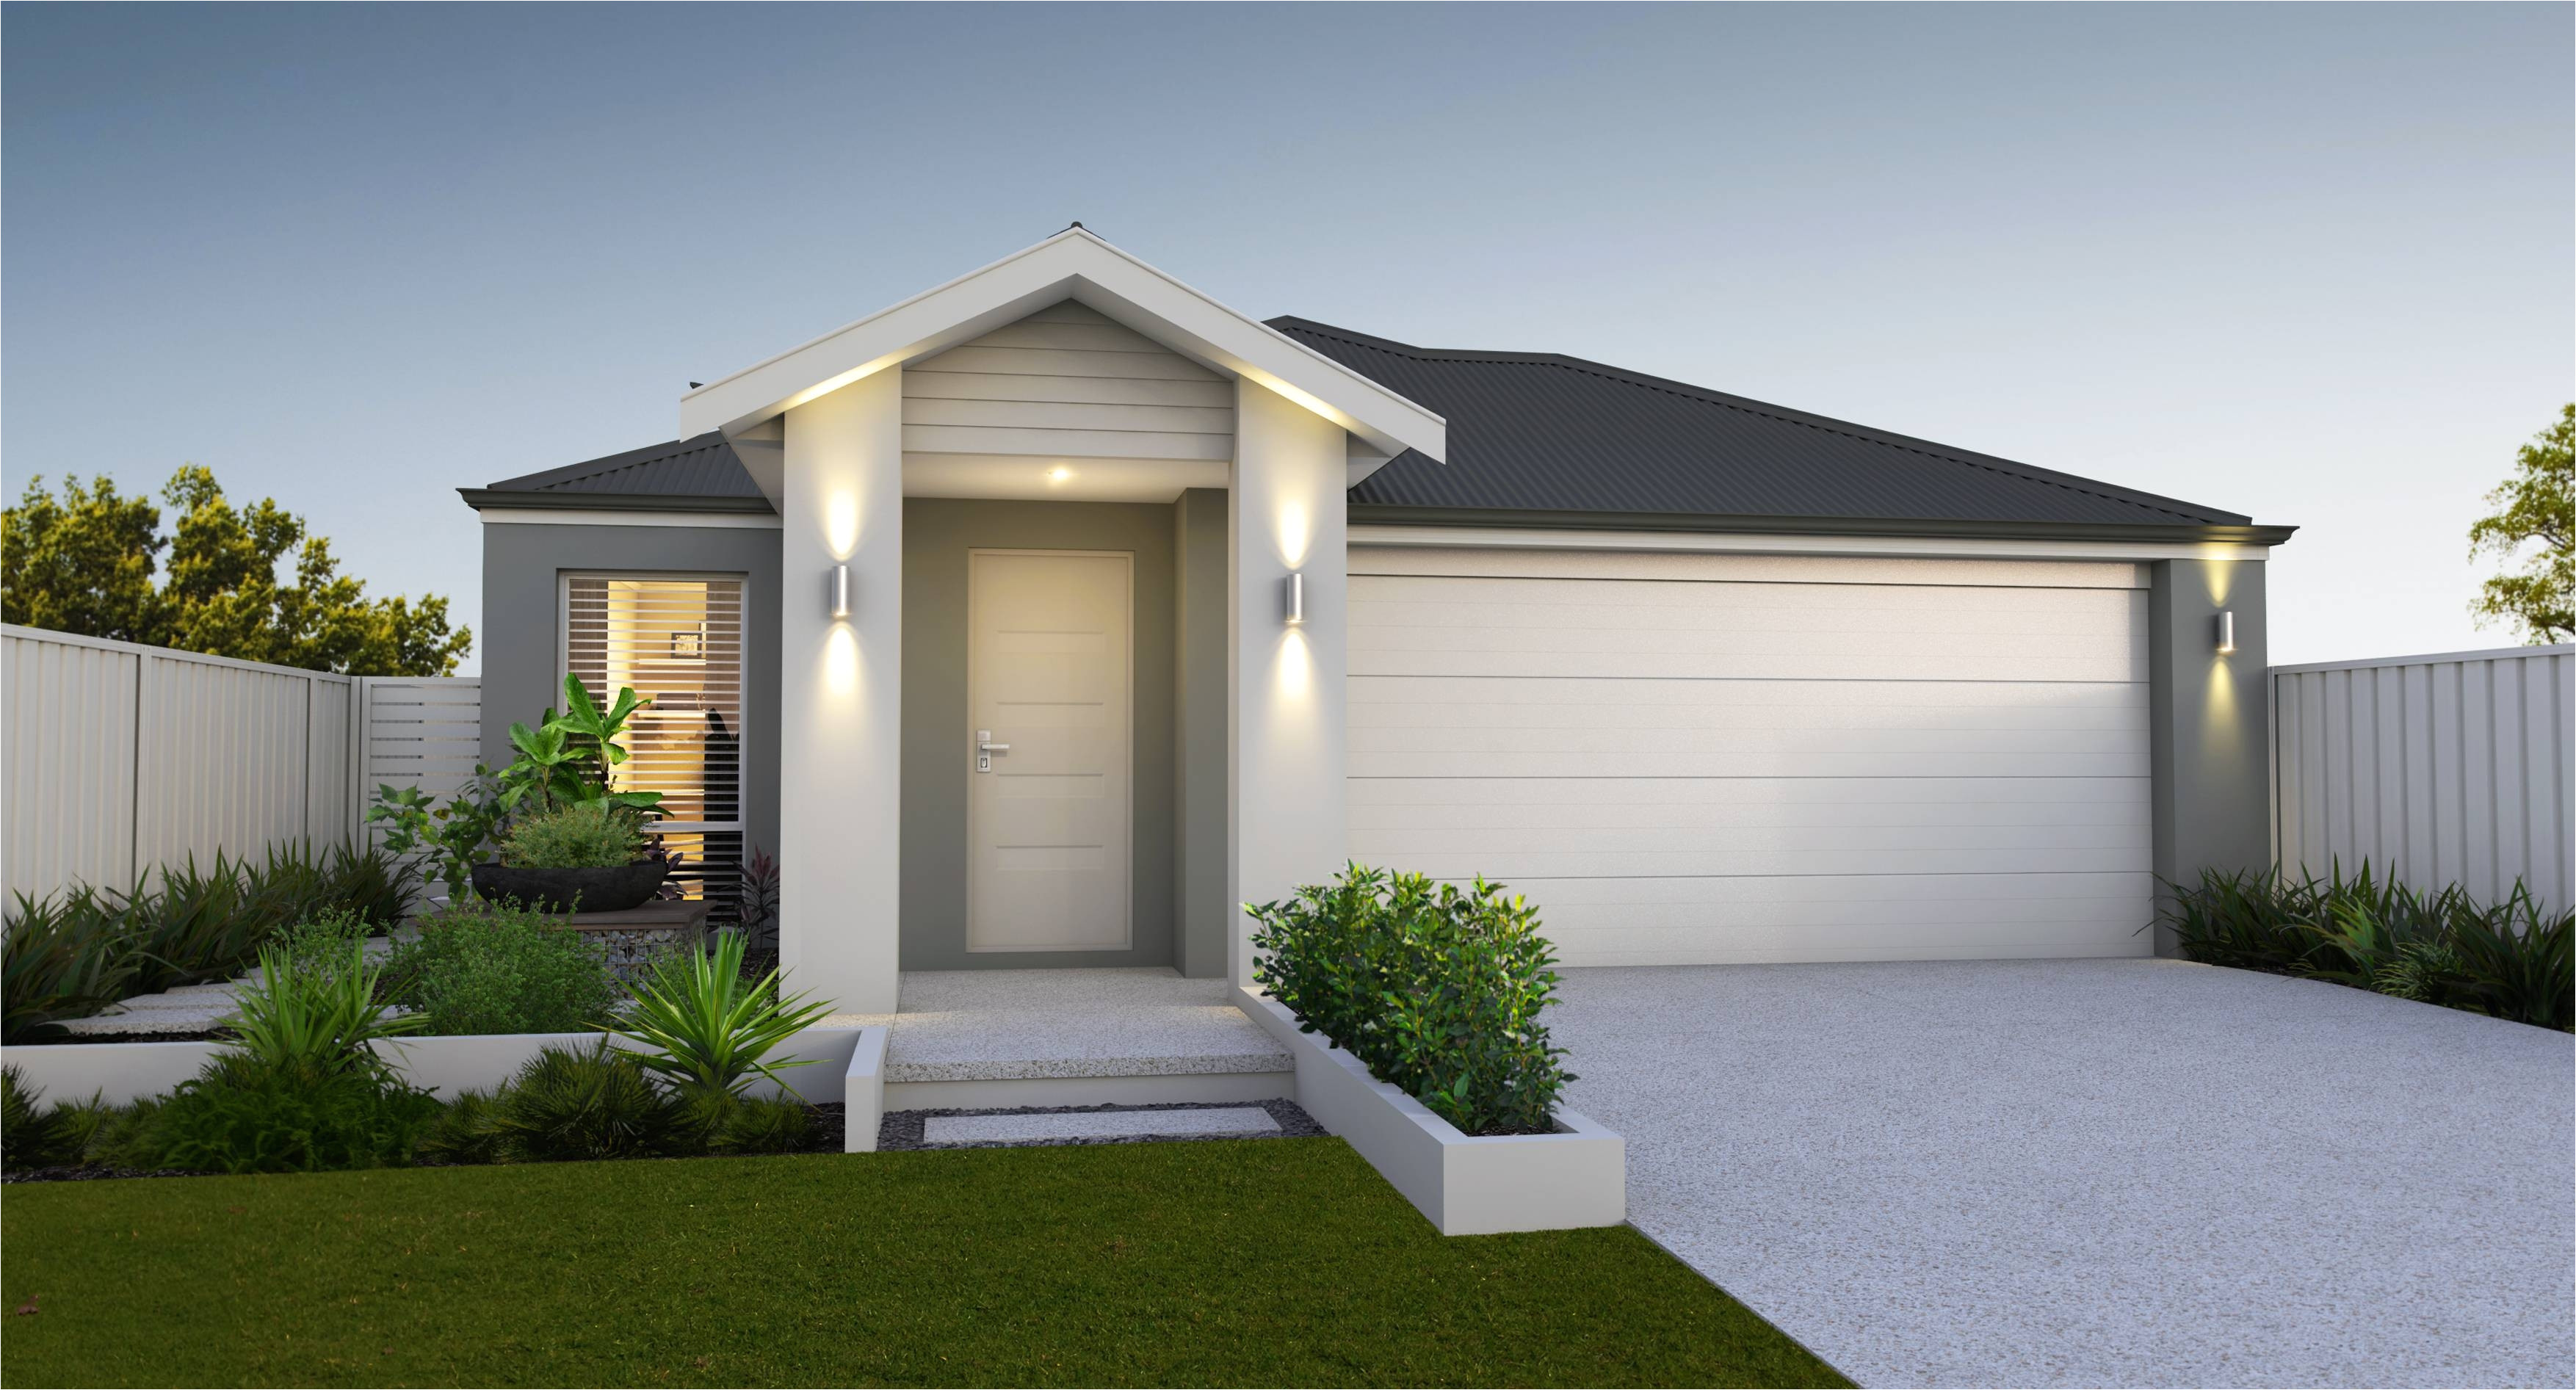 House Plans Under 200k to Build Perth New House Plans Under 200k to Build Design Home Design